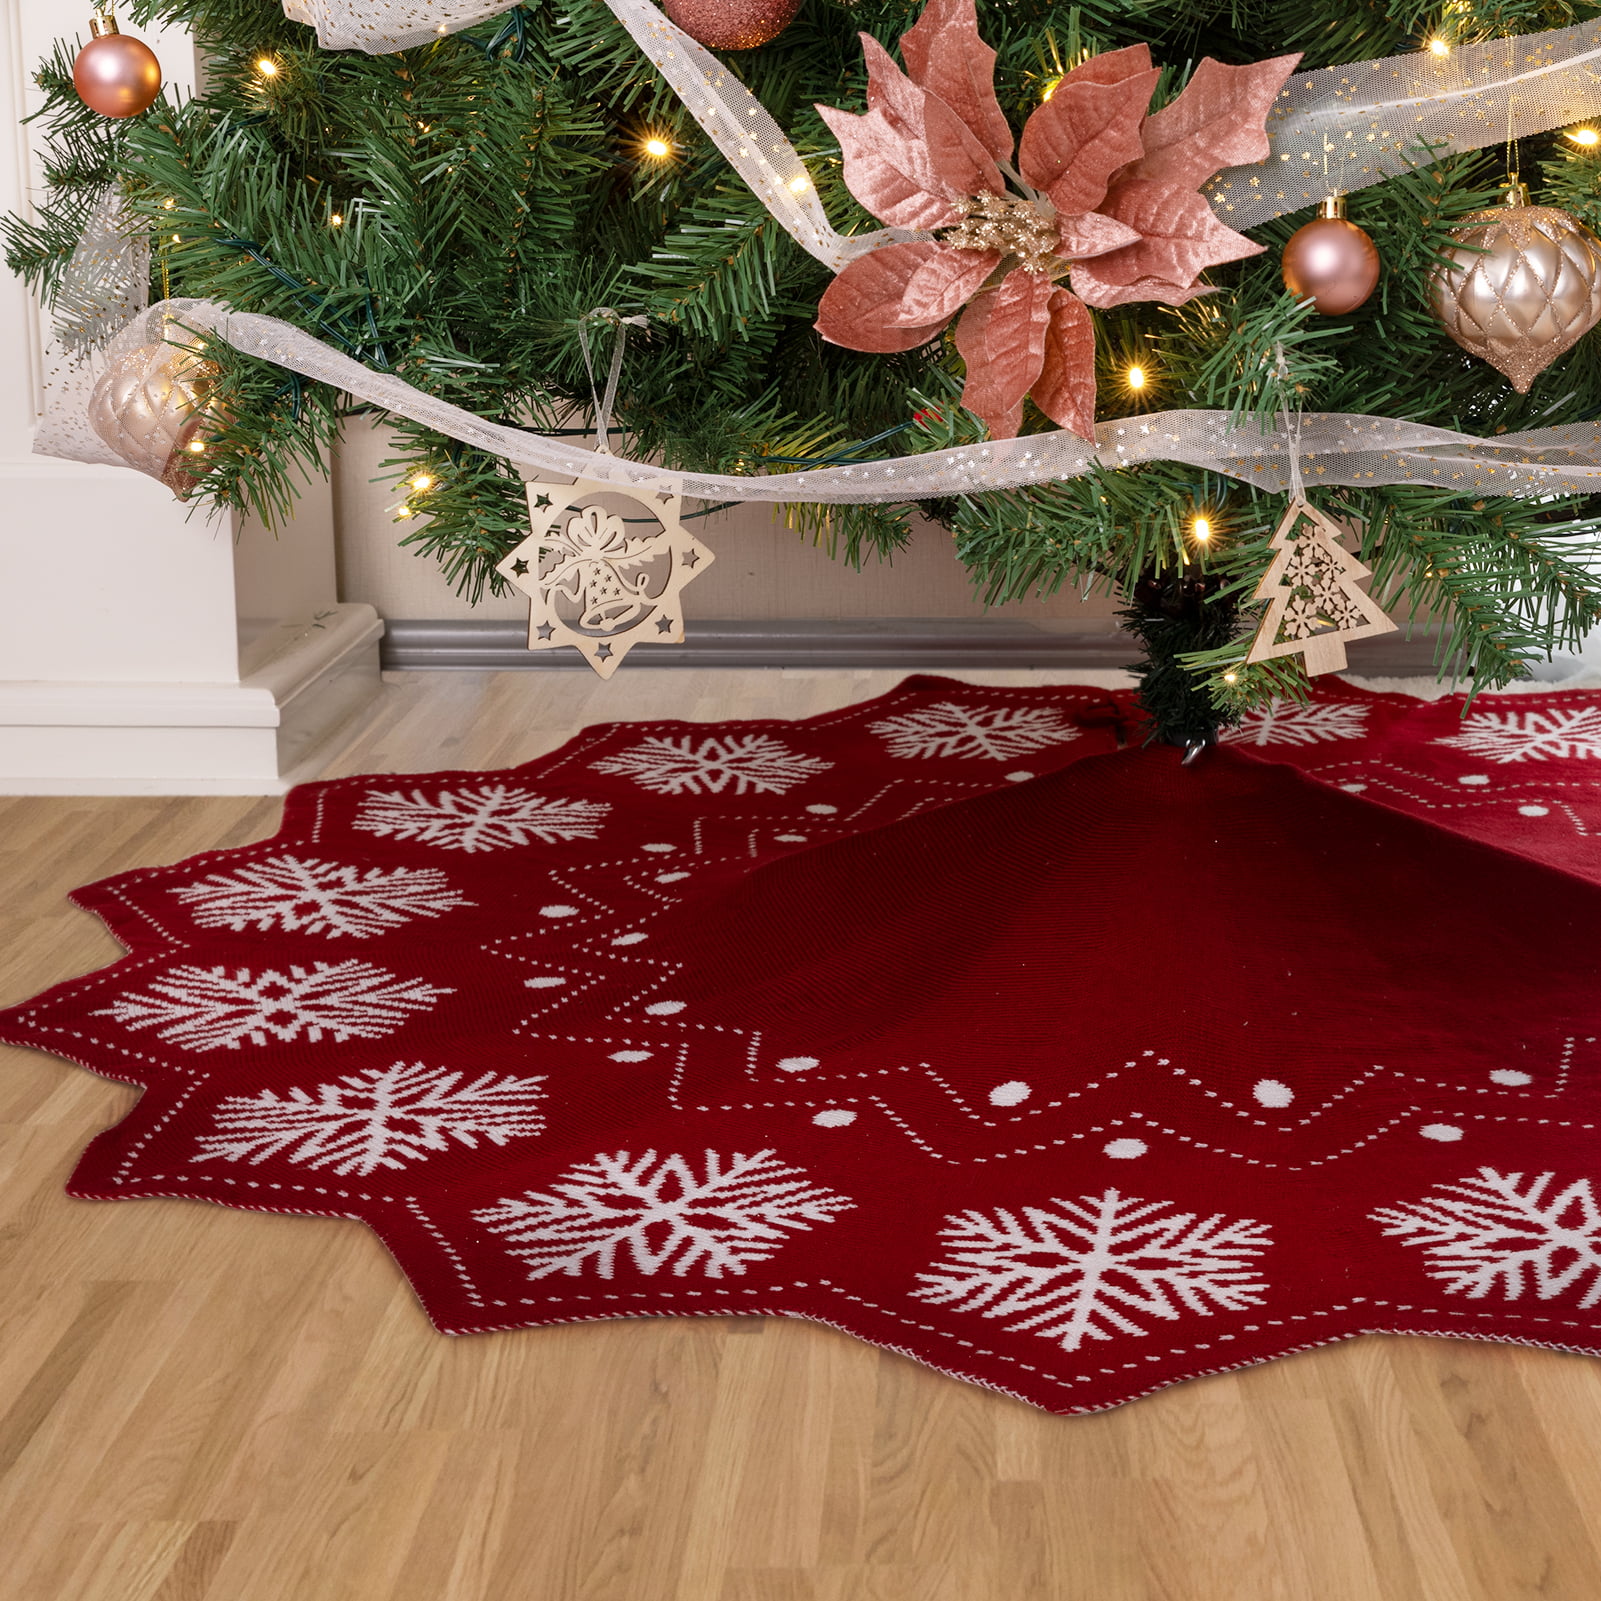 Large 36 Inches Xmas Tree Mat Traditional Christmas Snowflake Plaid Tree Skirt Mat for Xmas Holiday Party Ornaments Tree Dress Tree Cover Xmas Home Decor Red Elk Christmas Non-woven Fabric Tree Skirts Christmas Tree Skirt Christmas Decoration